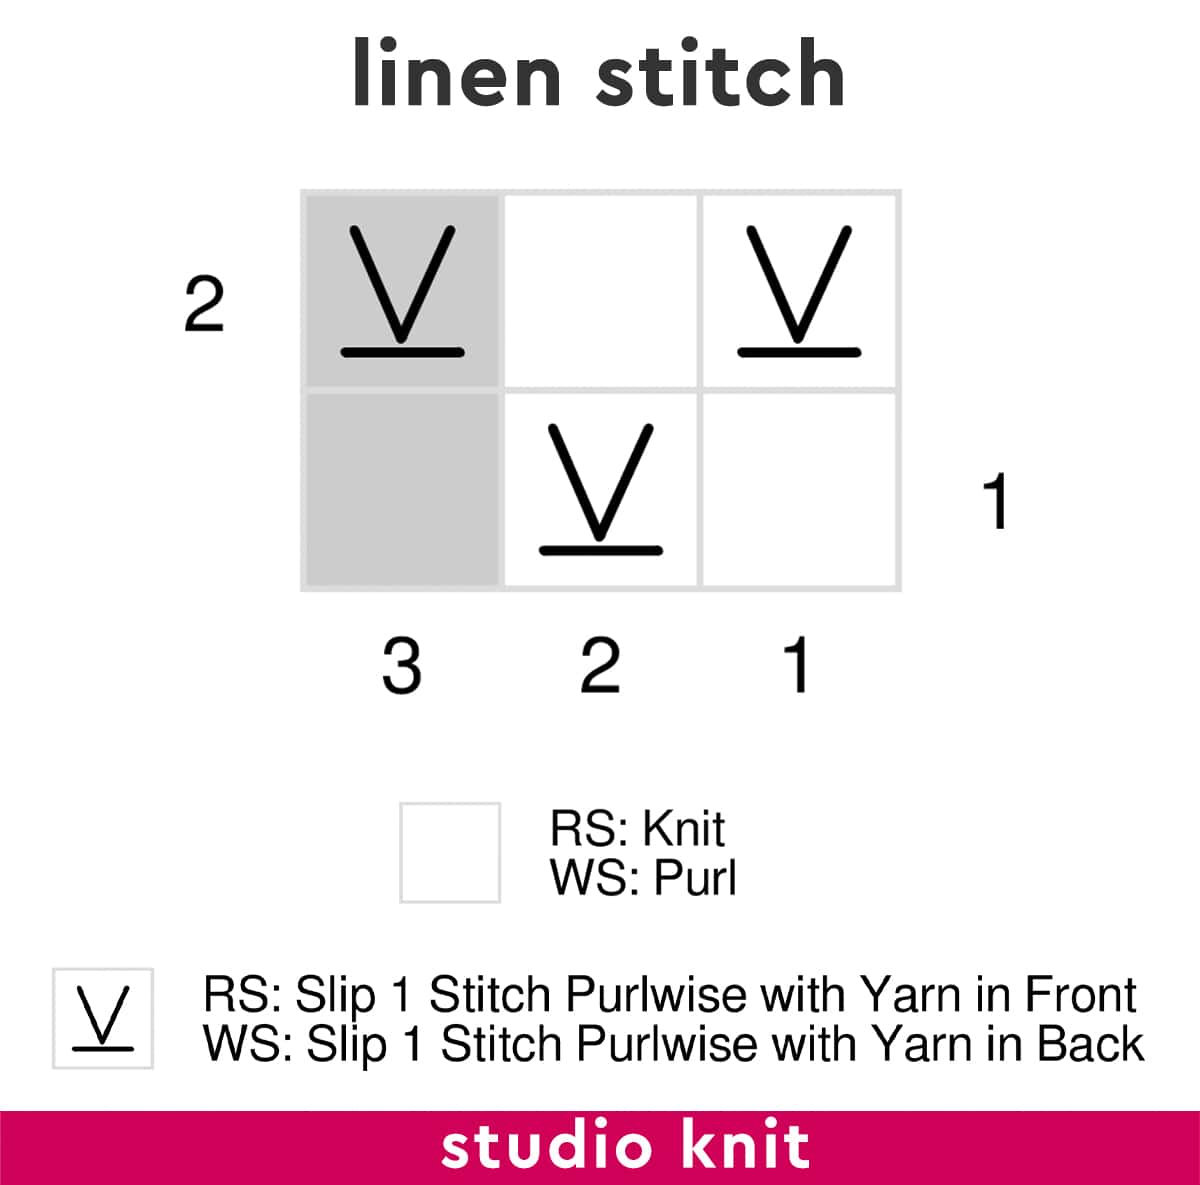 Knitting chart for the linen stitch.